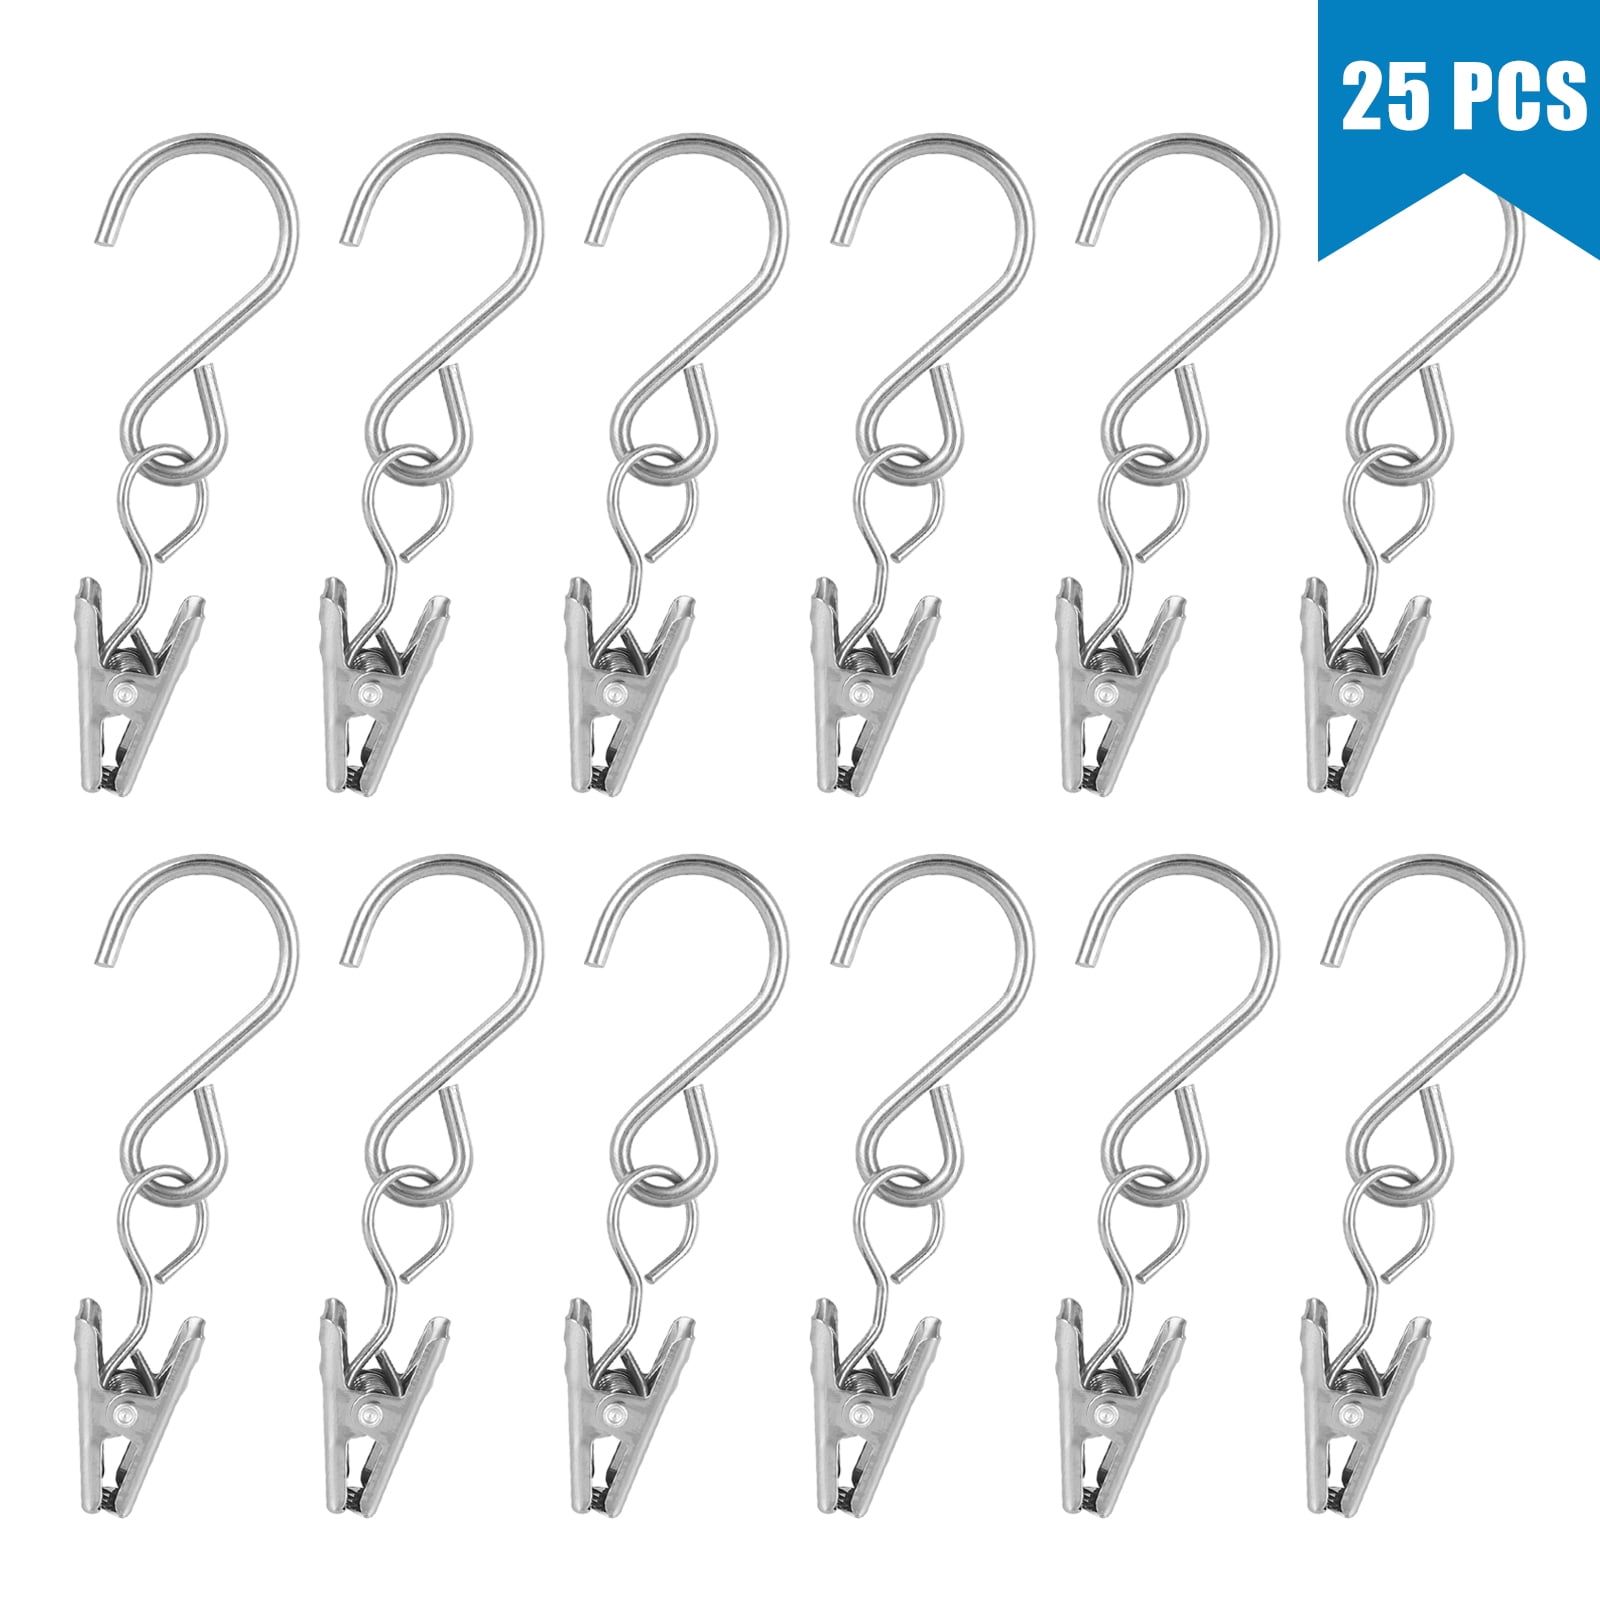 25pcs Curtain Clips with S Hooks, Stainless Steel Gutter Hanging Clamp for  Photos String Party Lights Bath Bedroom Decor 